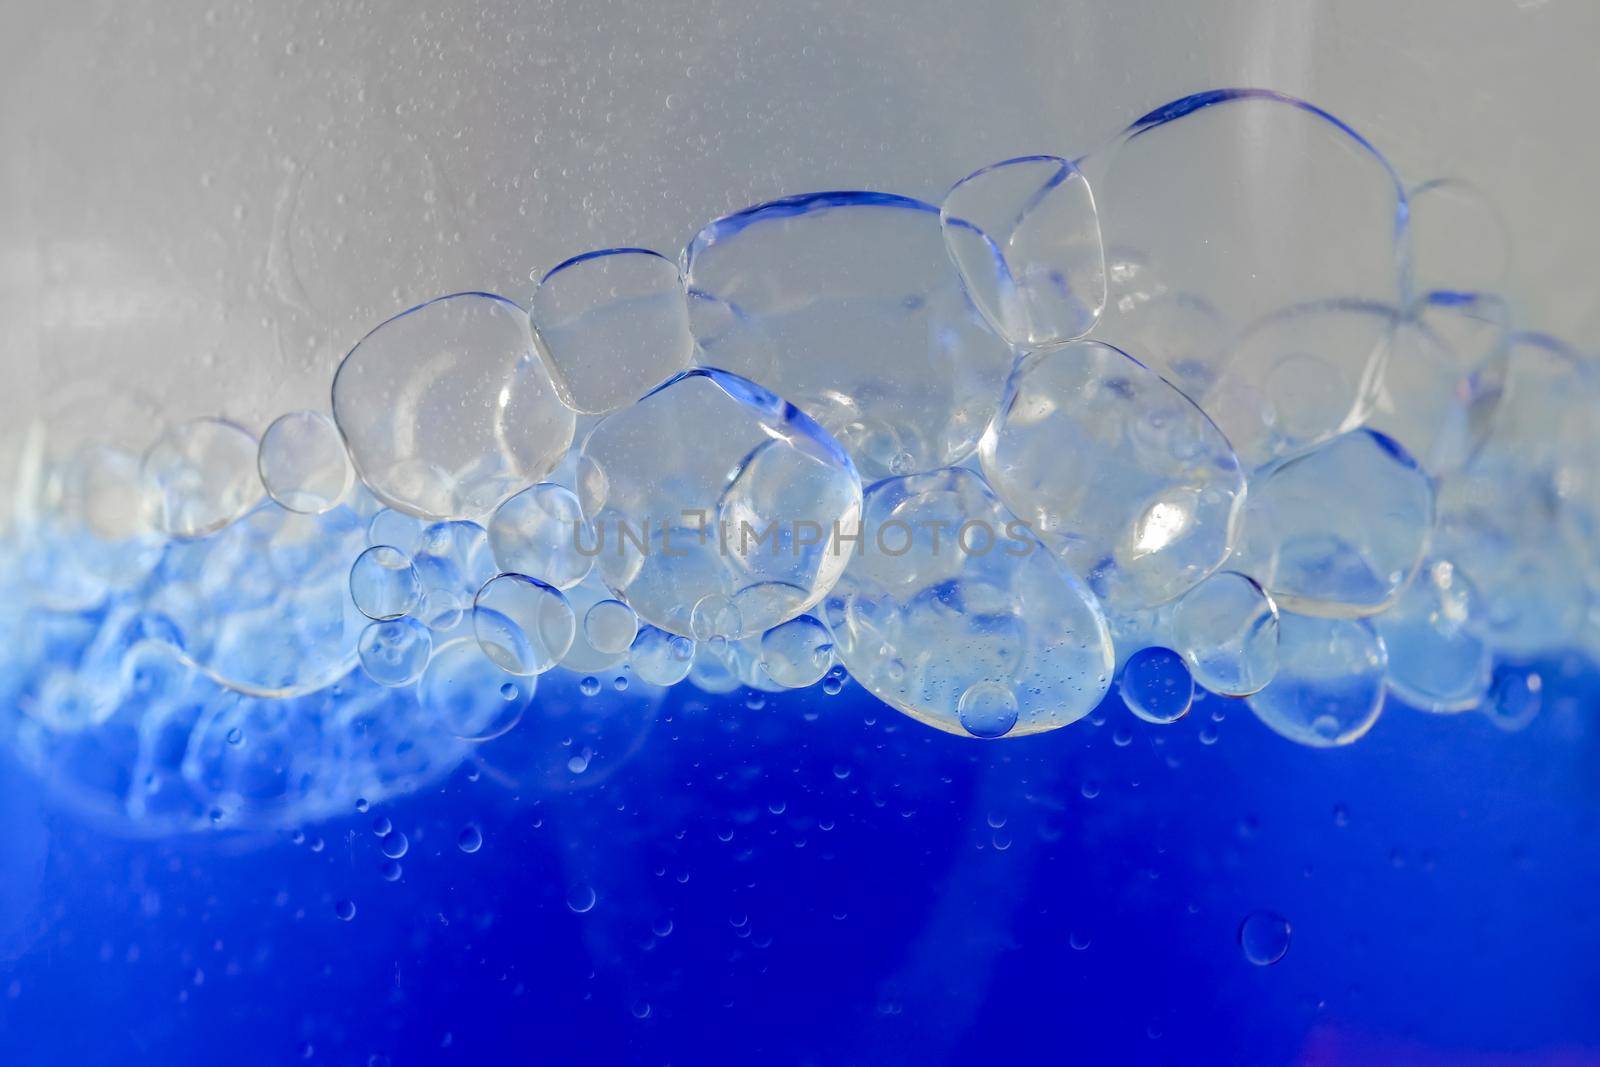 blue bubbles of micellar water macro as background. high-quality photos